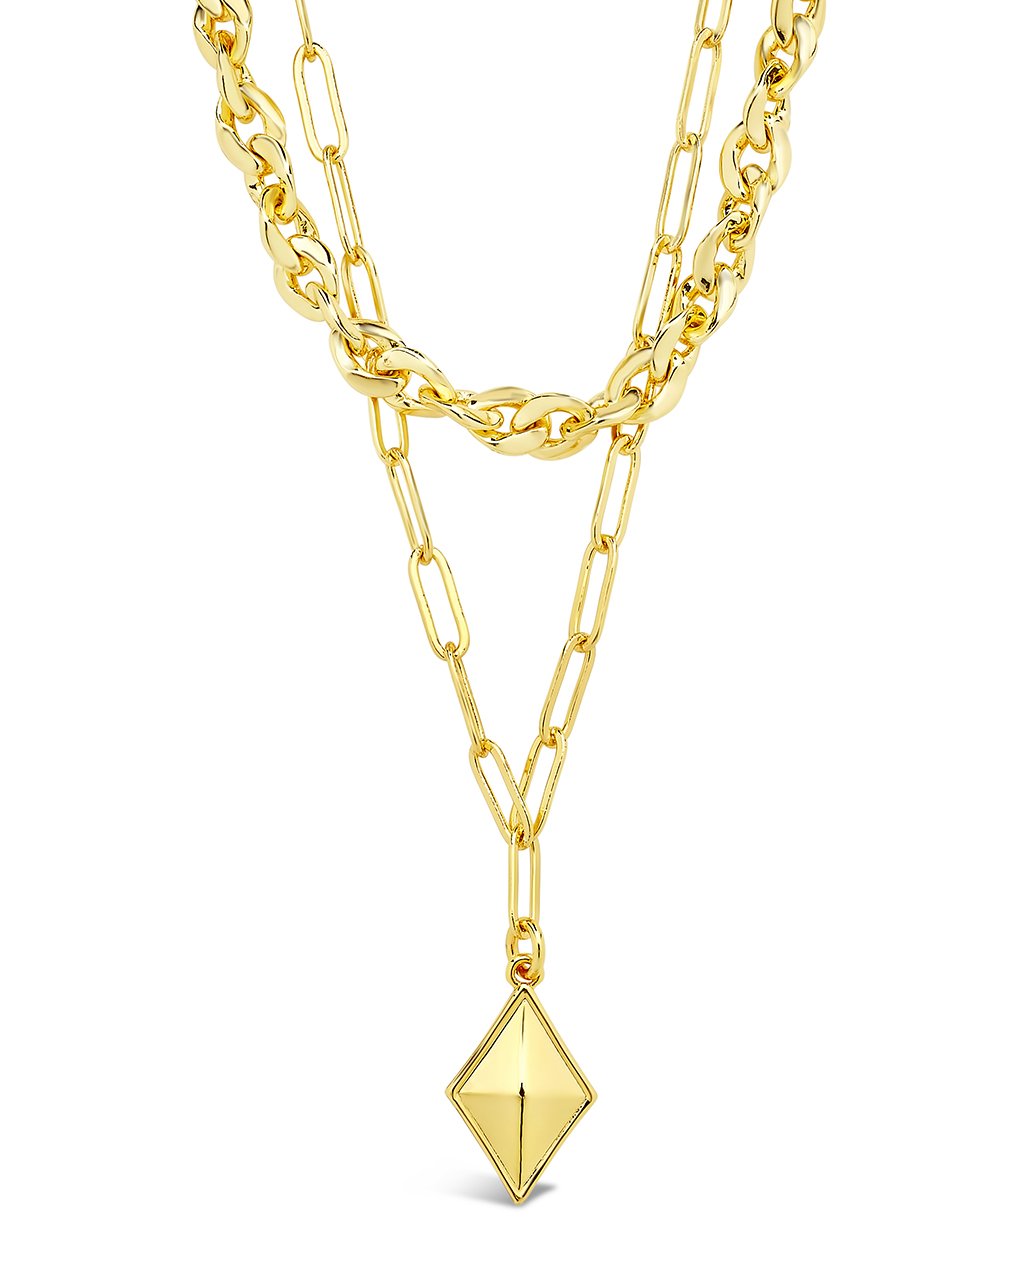 2 Layer Chain & Charm Necklace Necklace Sterling Forever Gold 